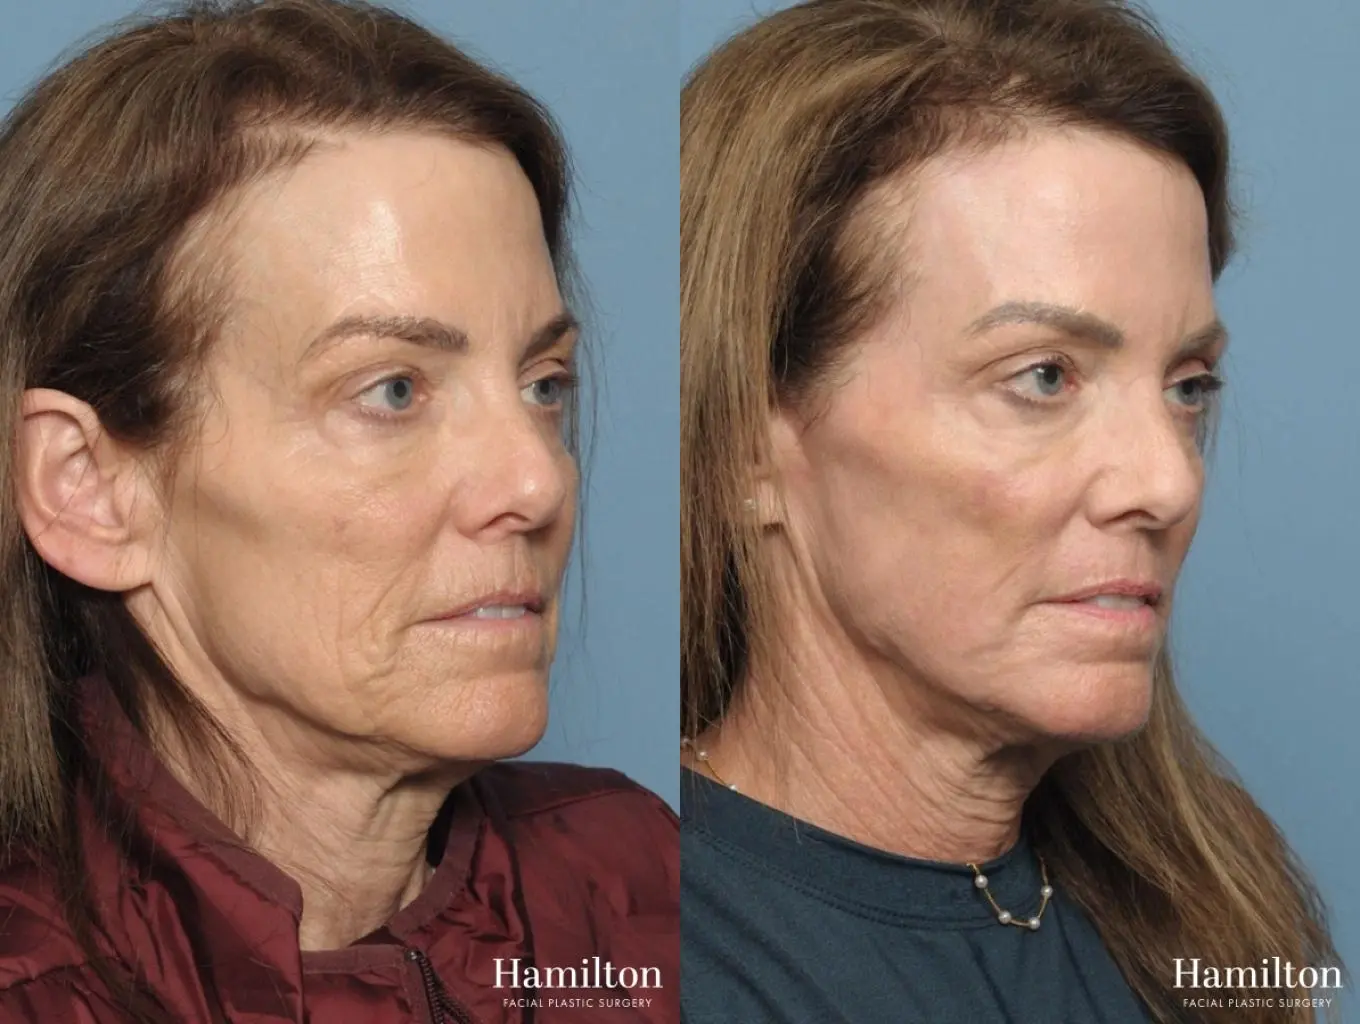 C02 Laser: Patient 3 - Before and After 4